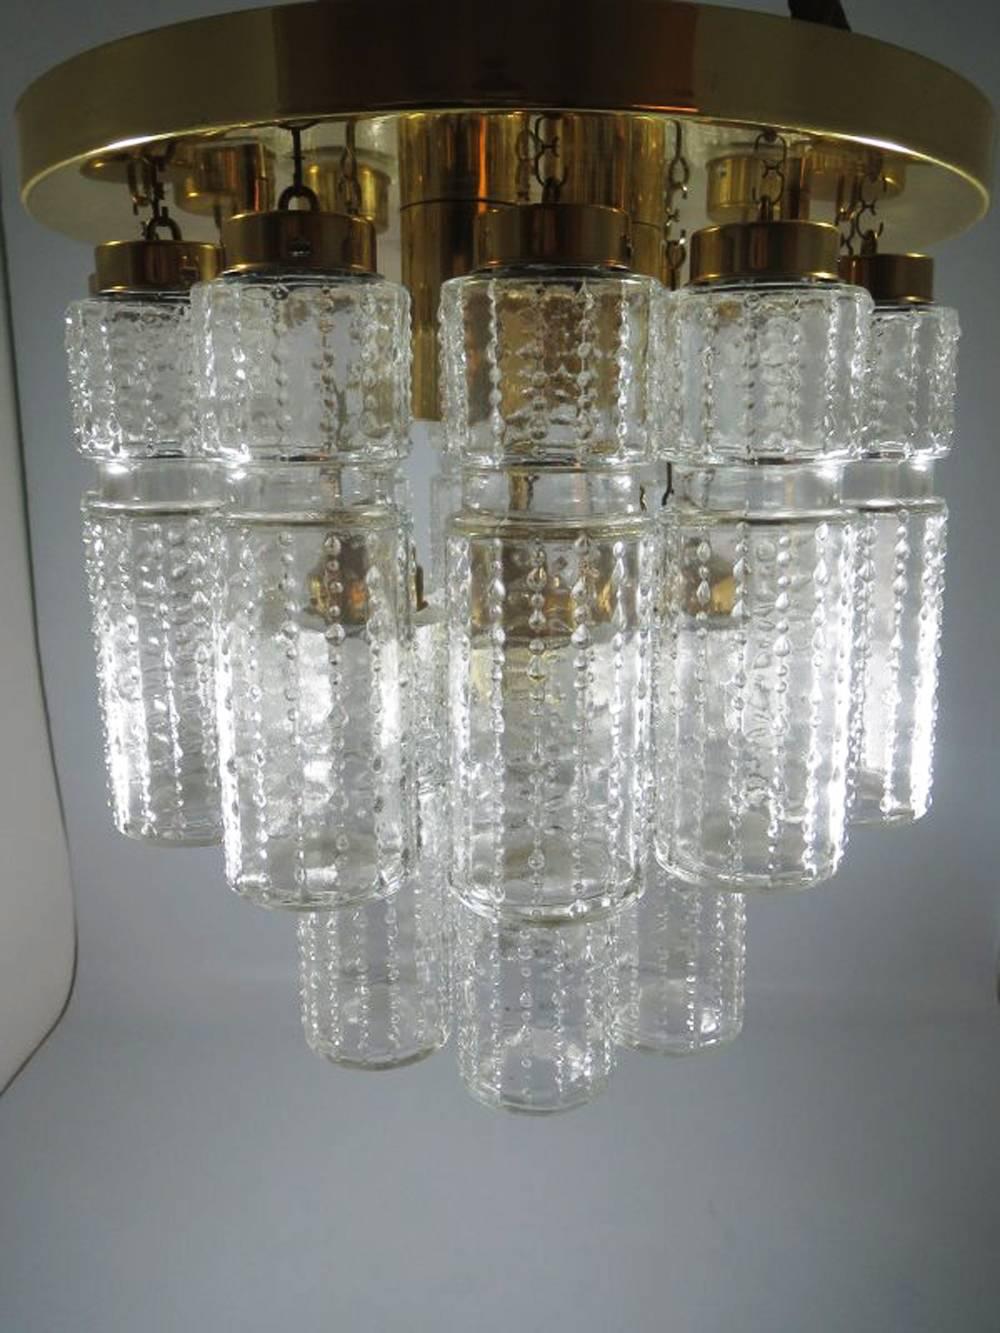 Amazing flush mount chandelier with 18 hanging hand blow textured hollow glass prisms mounted on a brass frame. Made by Glashütte Limburg in Germany model number 3170 and designed by Boris Tabacoff in the 1970s.
Excellent original condition. Fitted